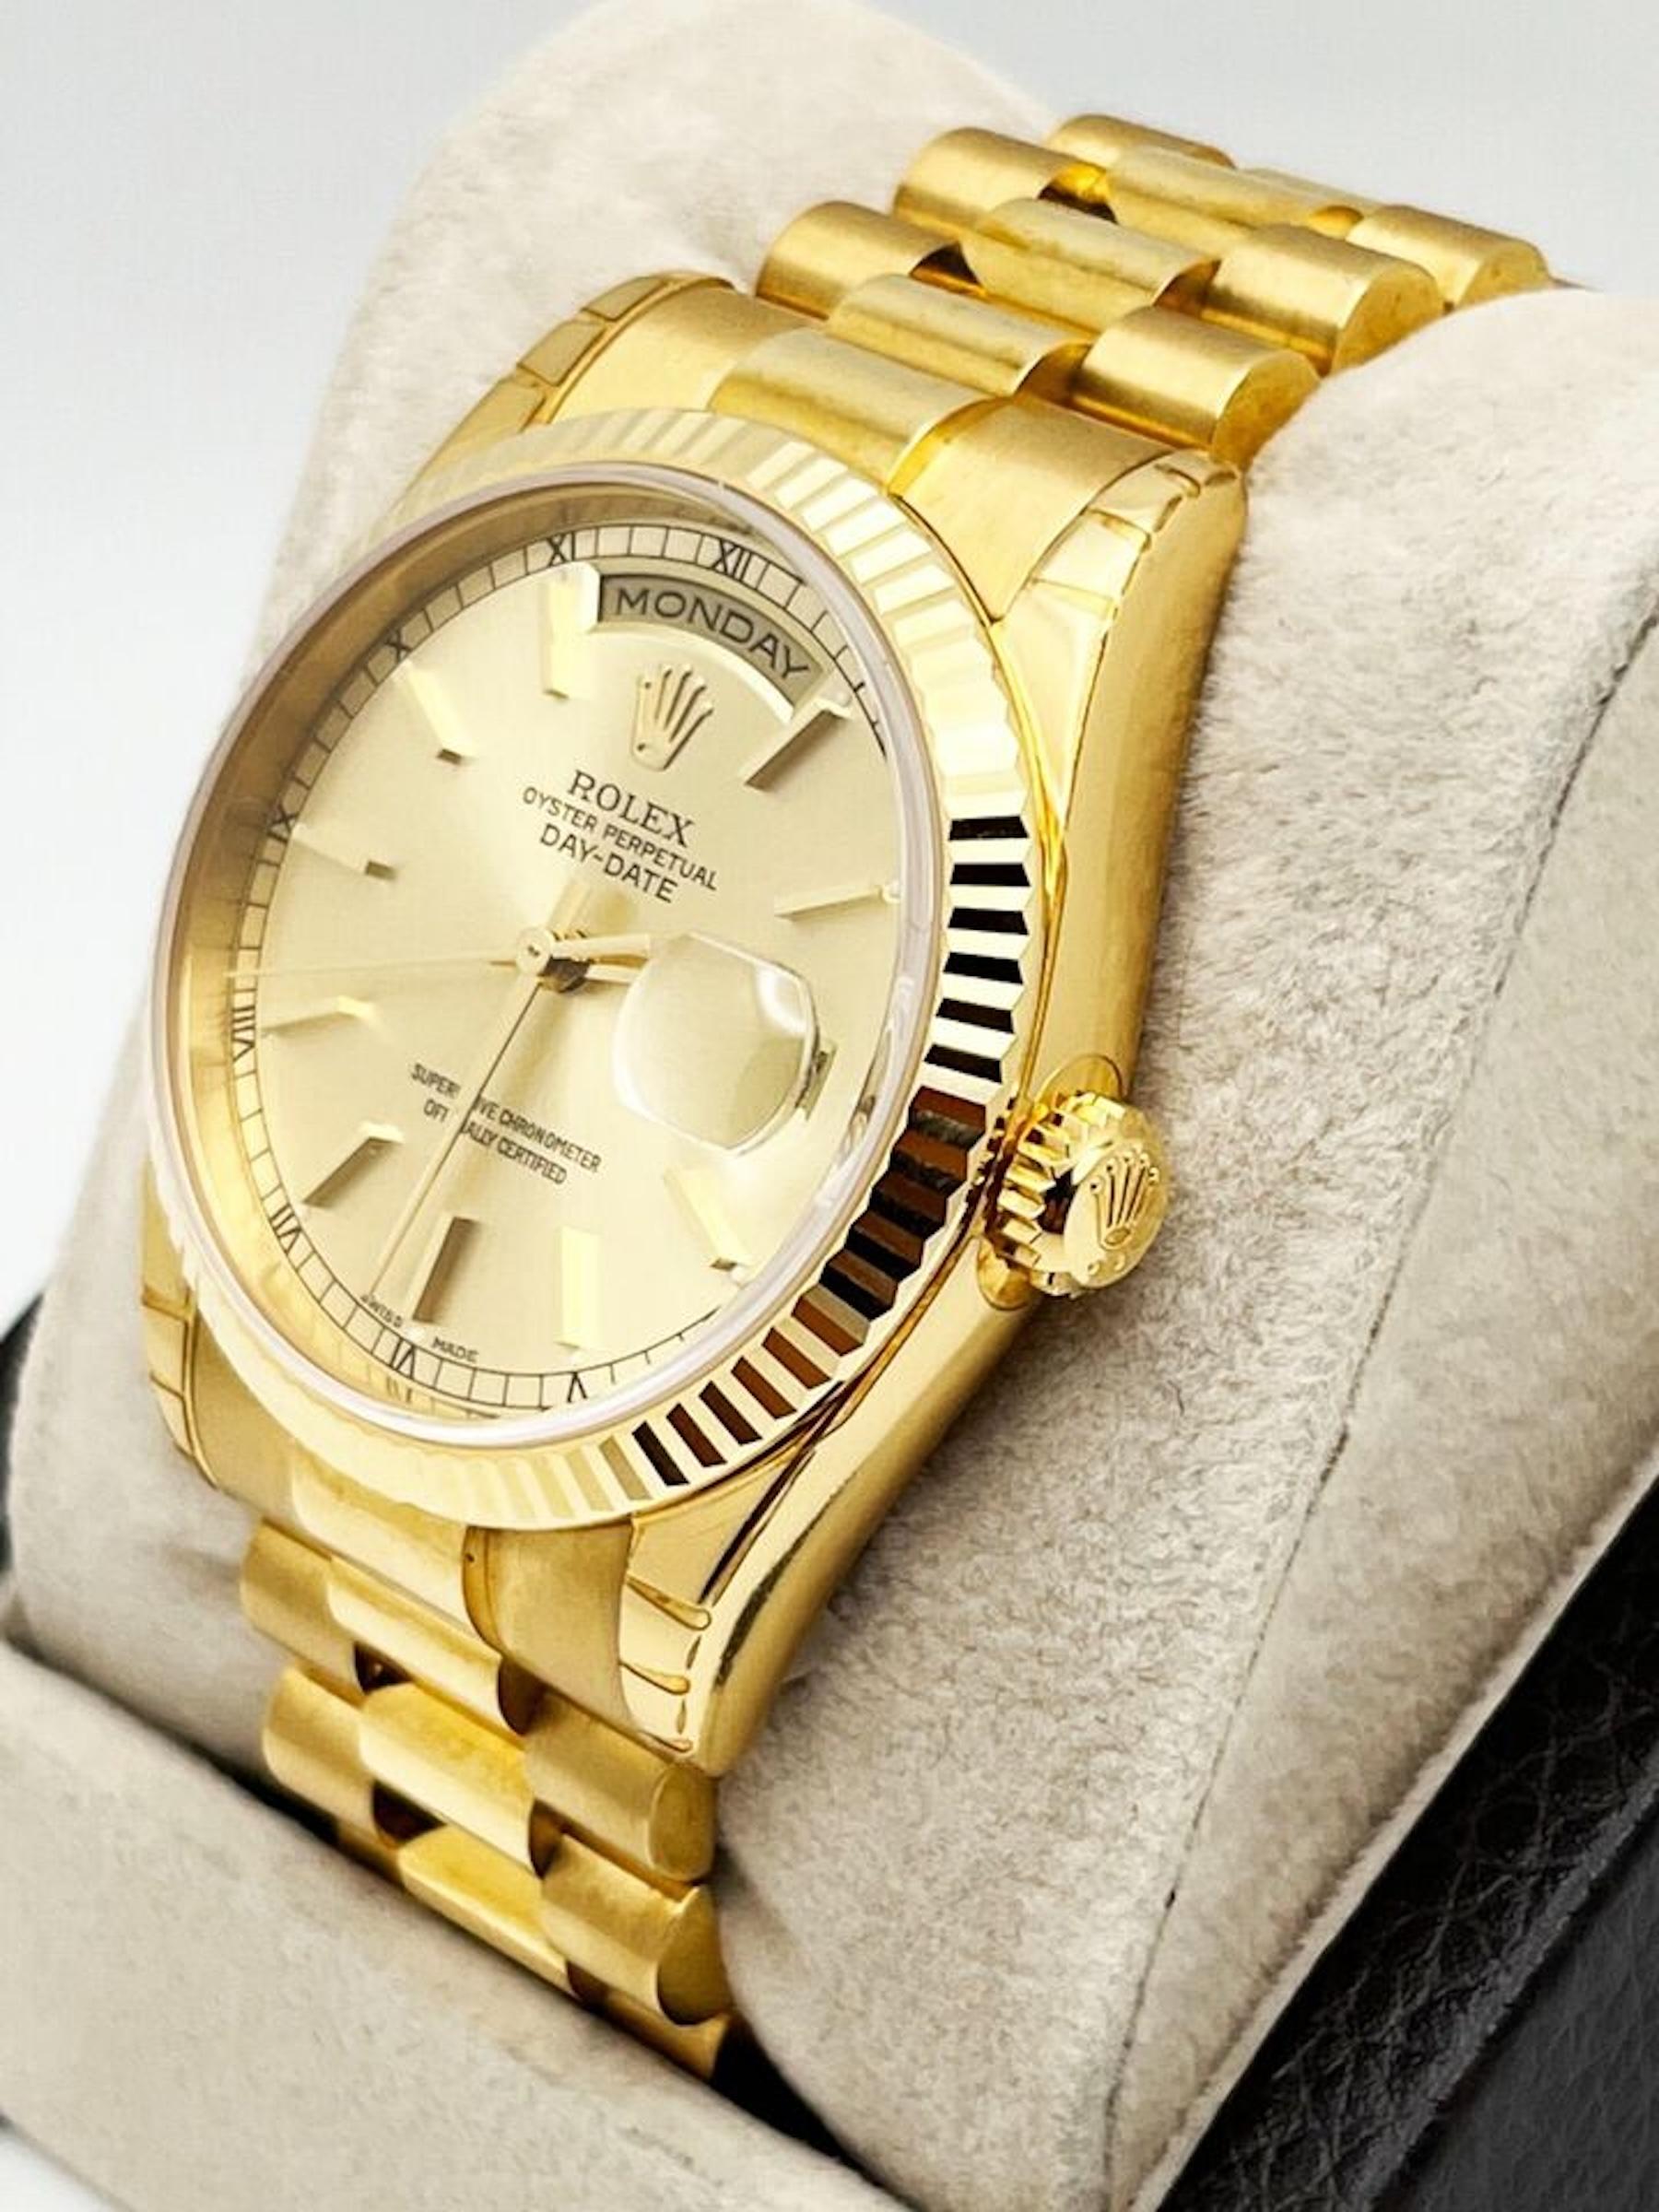 Style Number: 118238. New style buckle With Factory Stickers 

Serial: F626***

Year: 2005 

Model: President Day Date  

Case Material: 18K Yellow Gold 

Band: 18K Yellow Gold 
 
Bezel: 18K Yellow Gold 

Dial: Champagne 

Face: Sapphire Crystal